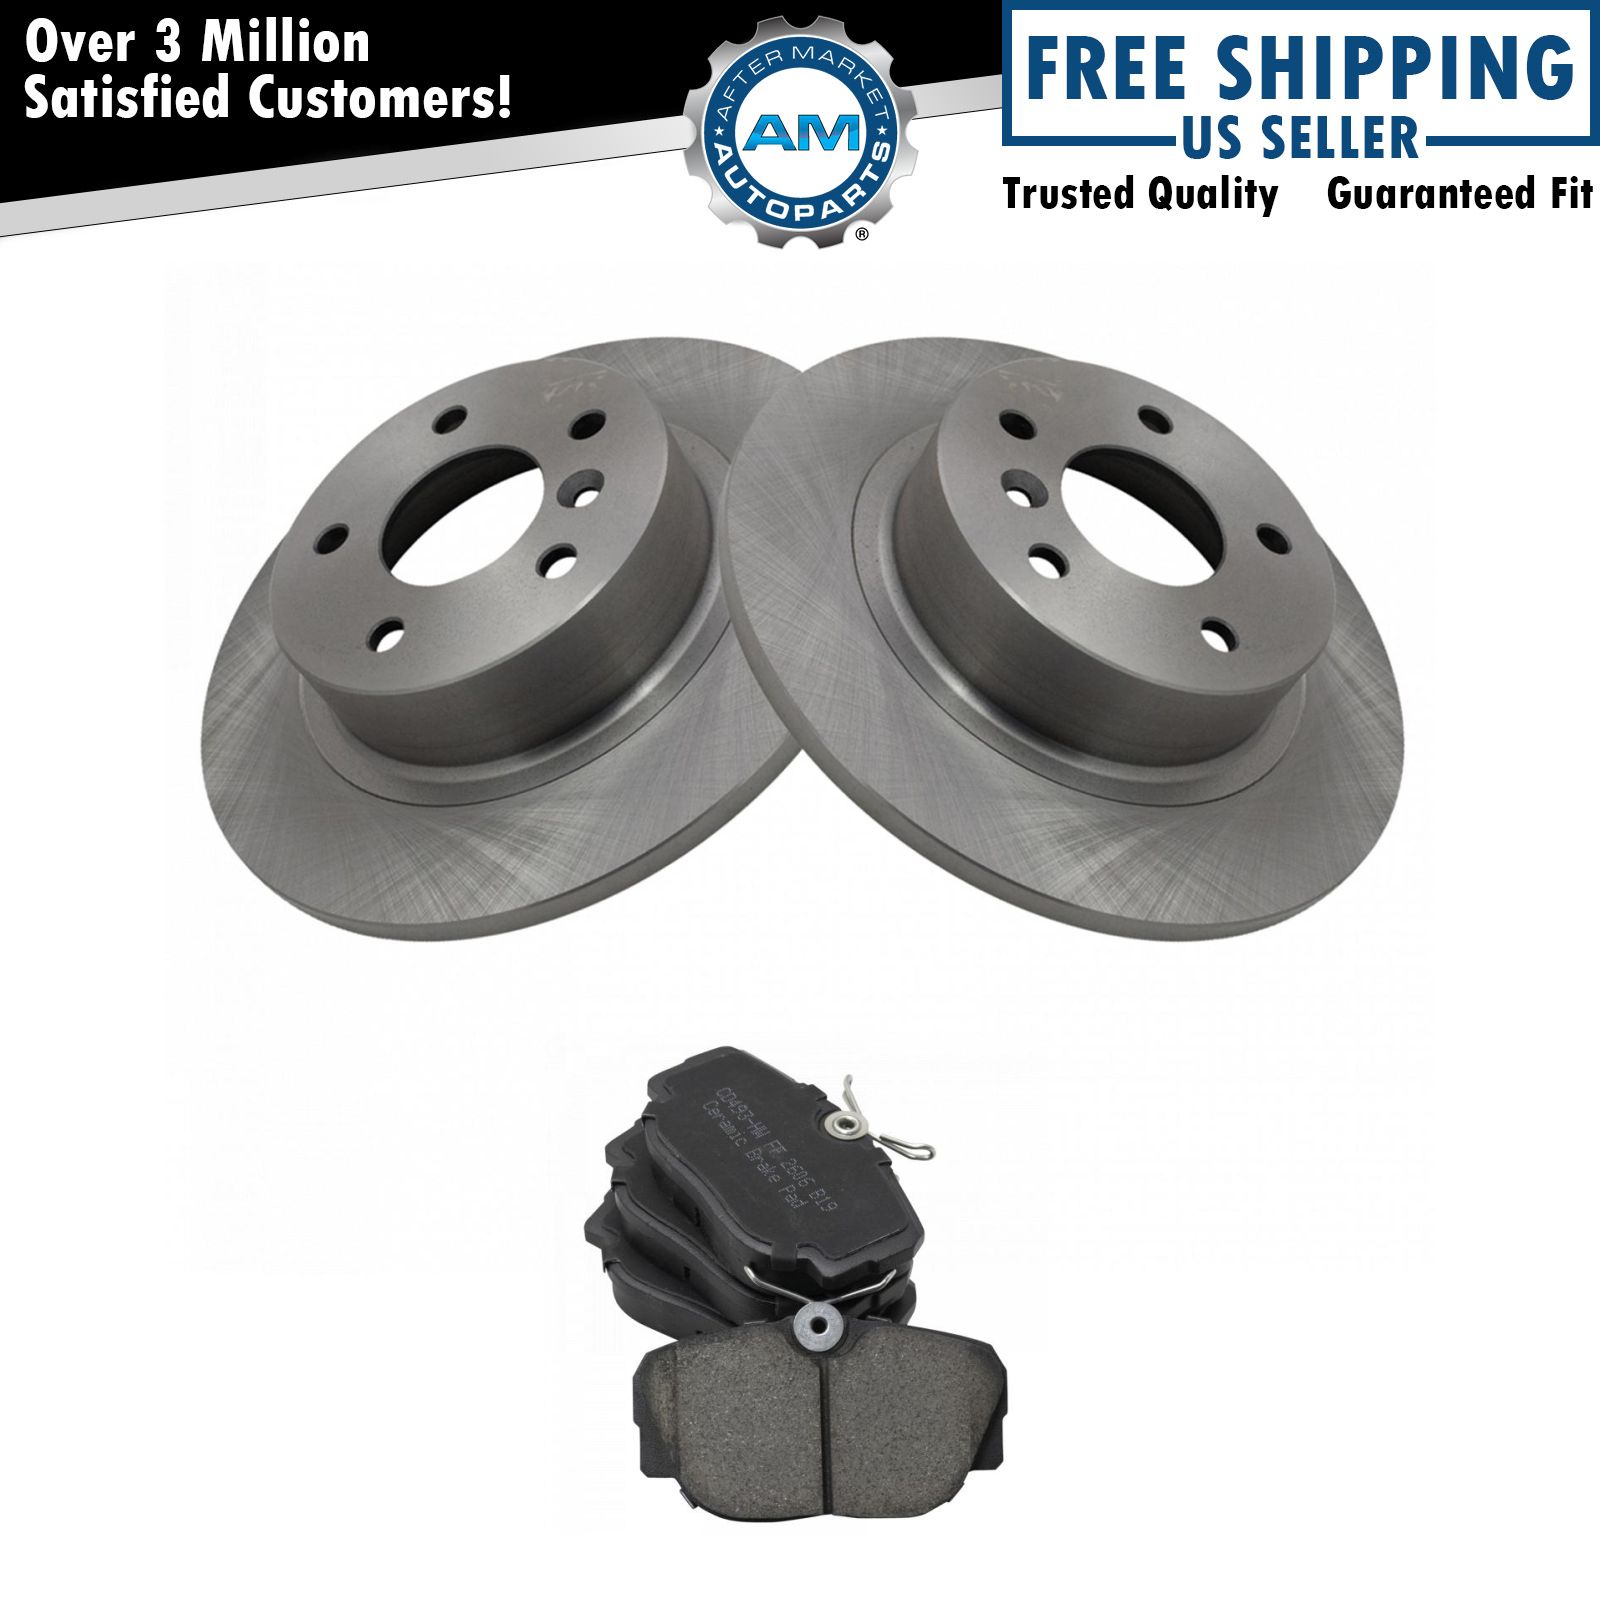 Rear Brake Pads & Rotor Kit For 99-04 Land Rover Discovery 95-02 Range Rover